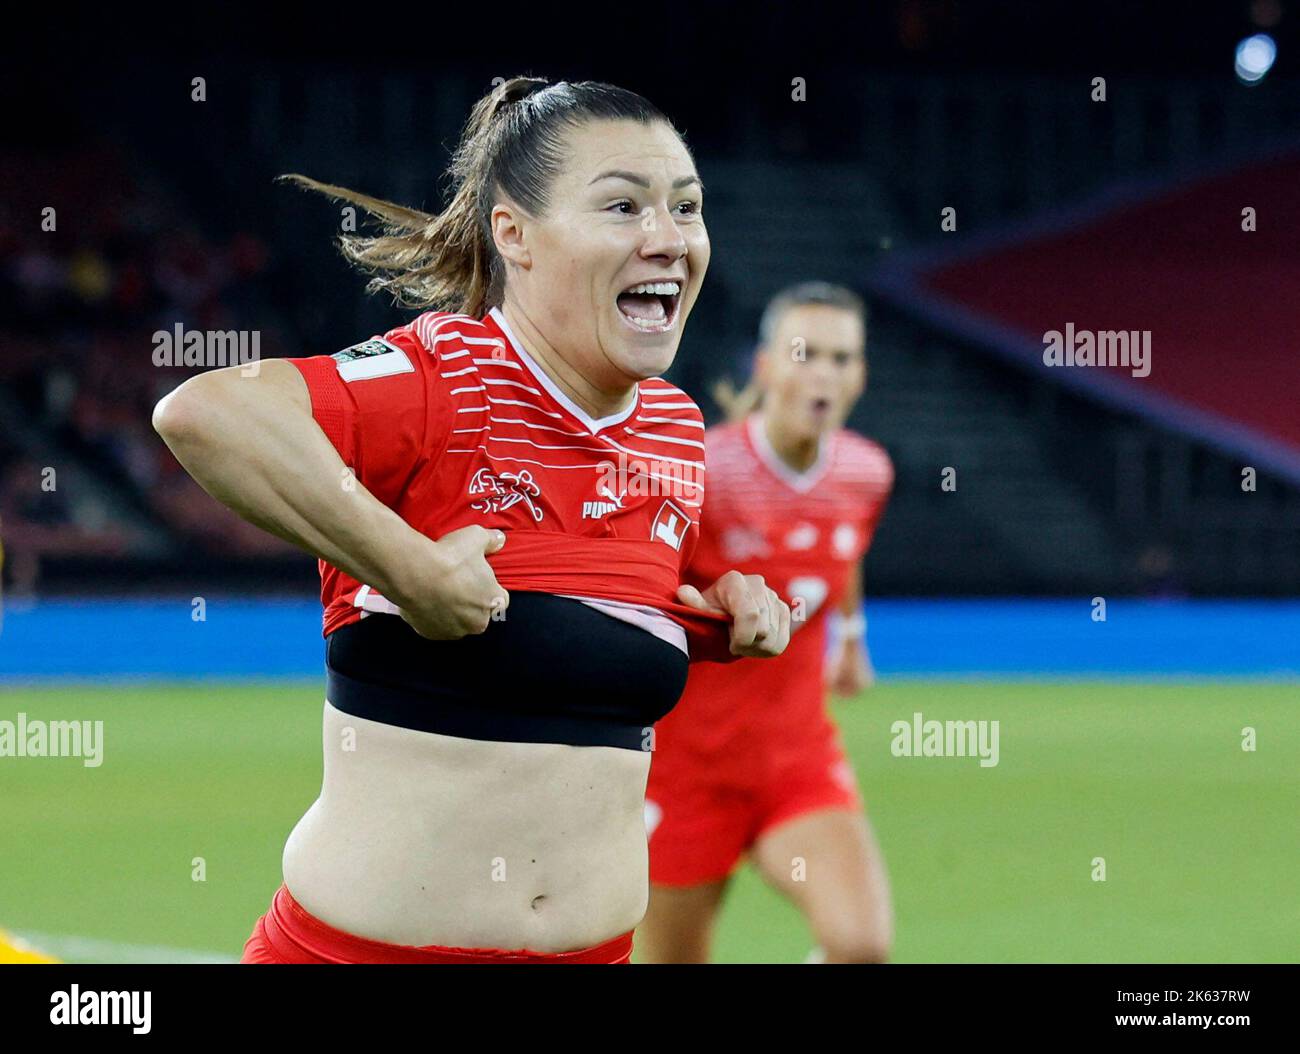 Soccer Football - FIFA Women's World Cup - UEFA Qualifiers - Switzerland v Wales - Stadion Letzigrund, Zurich, Switzerland - October 11, 2022 Switzerland's Ramona Bachmann celebrates scoring their second goal REUTERS/Stefan Wermuth Stock Photo